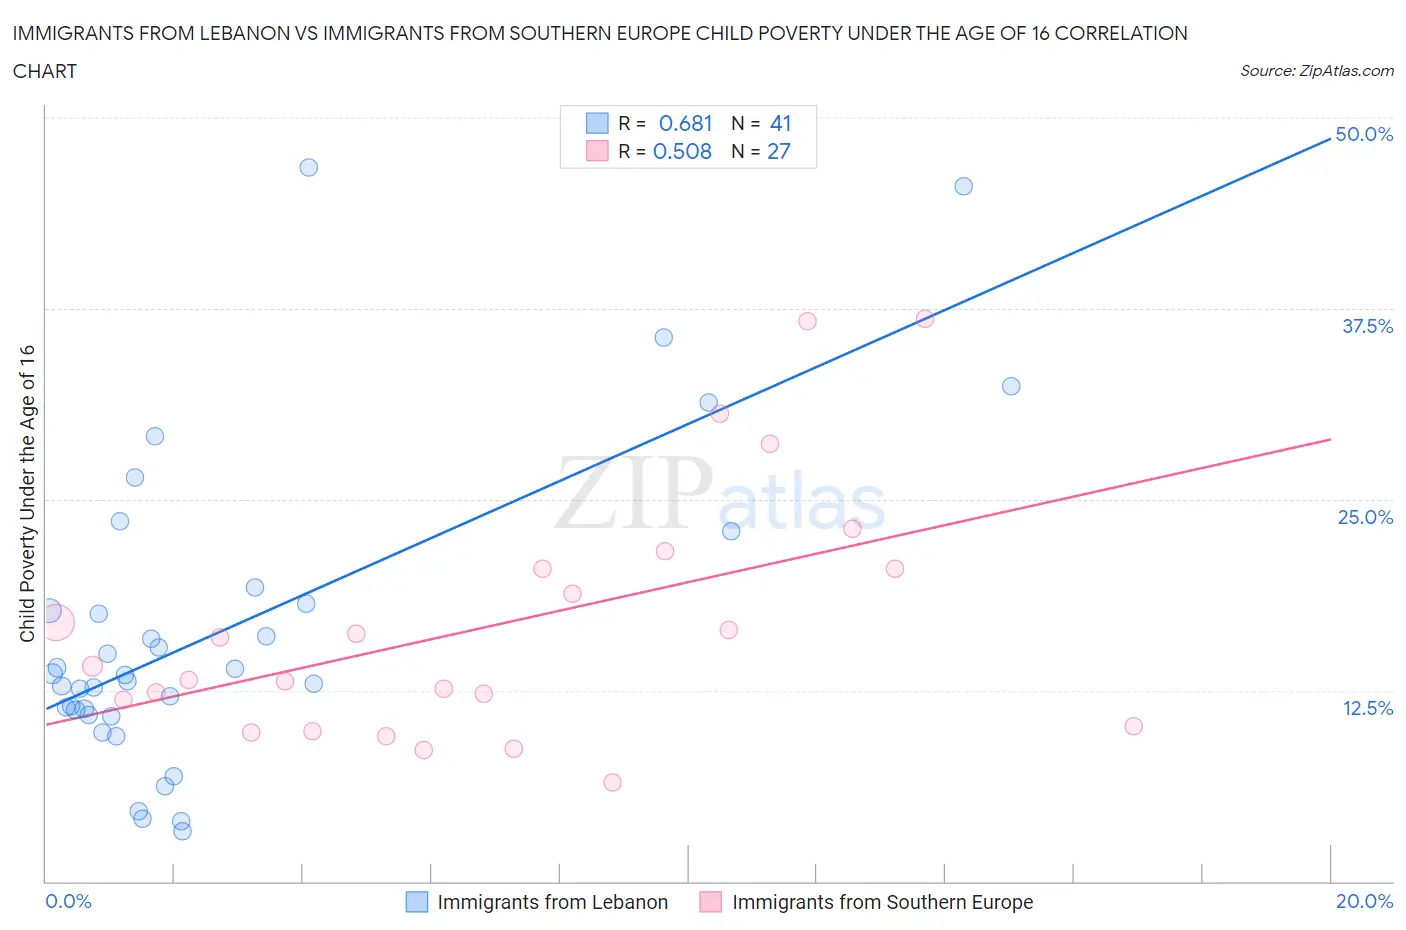 Immigrants from Lebanon vs Immigrants from Southern Europe Child Poverty Under the Age of 16